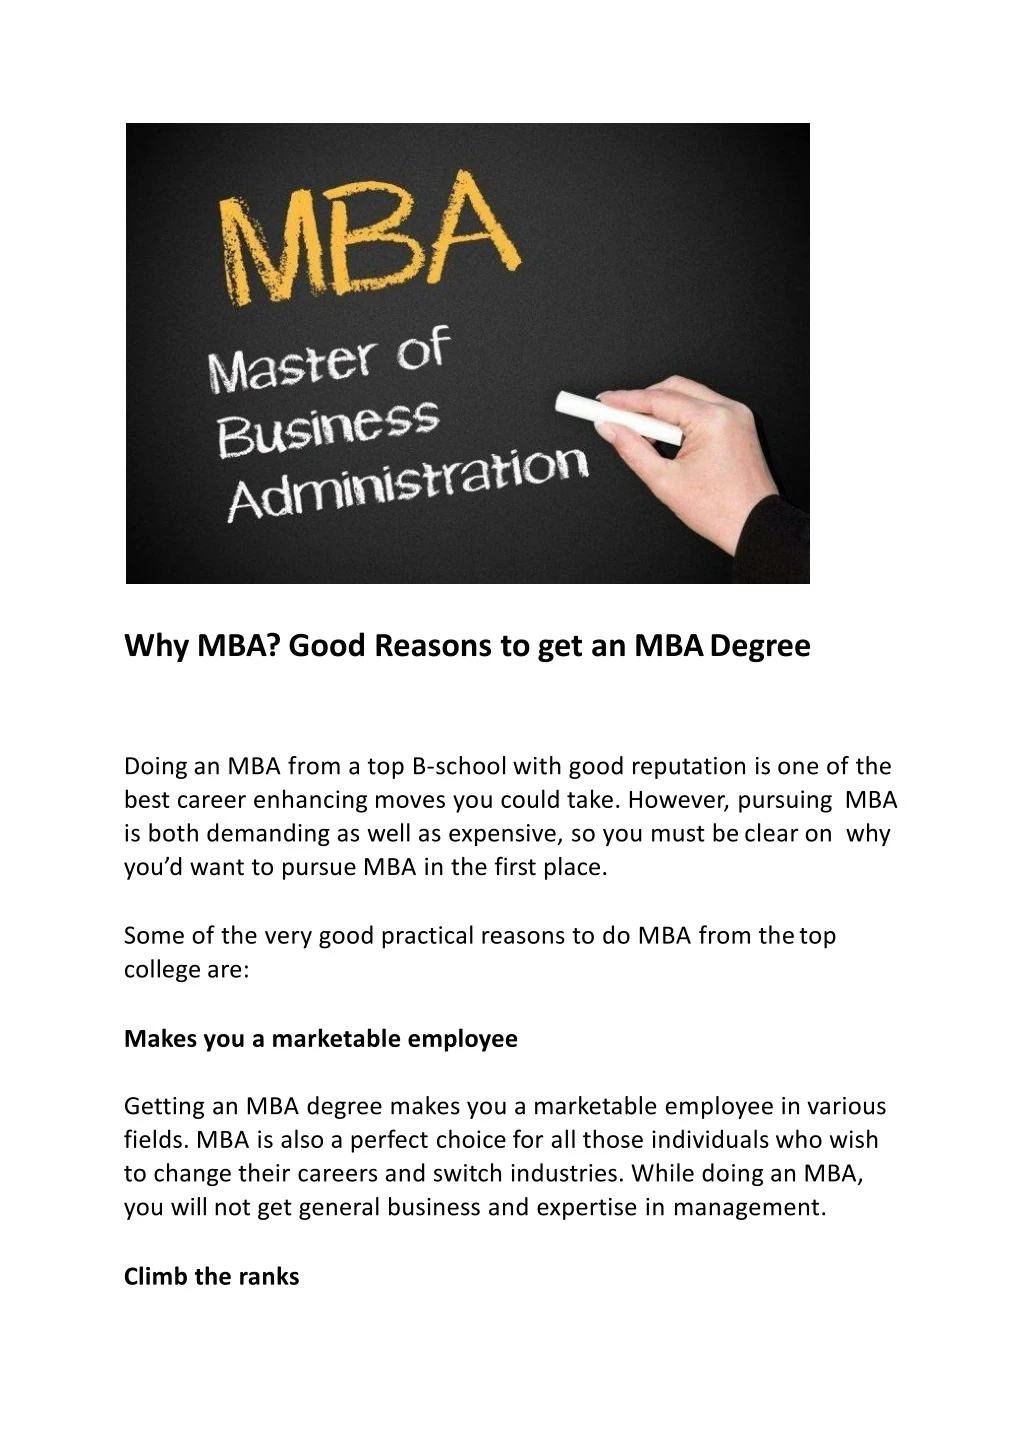 why mba good reasons to get an mba degree